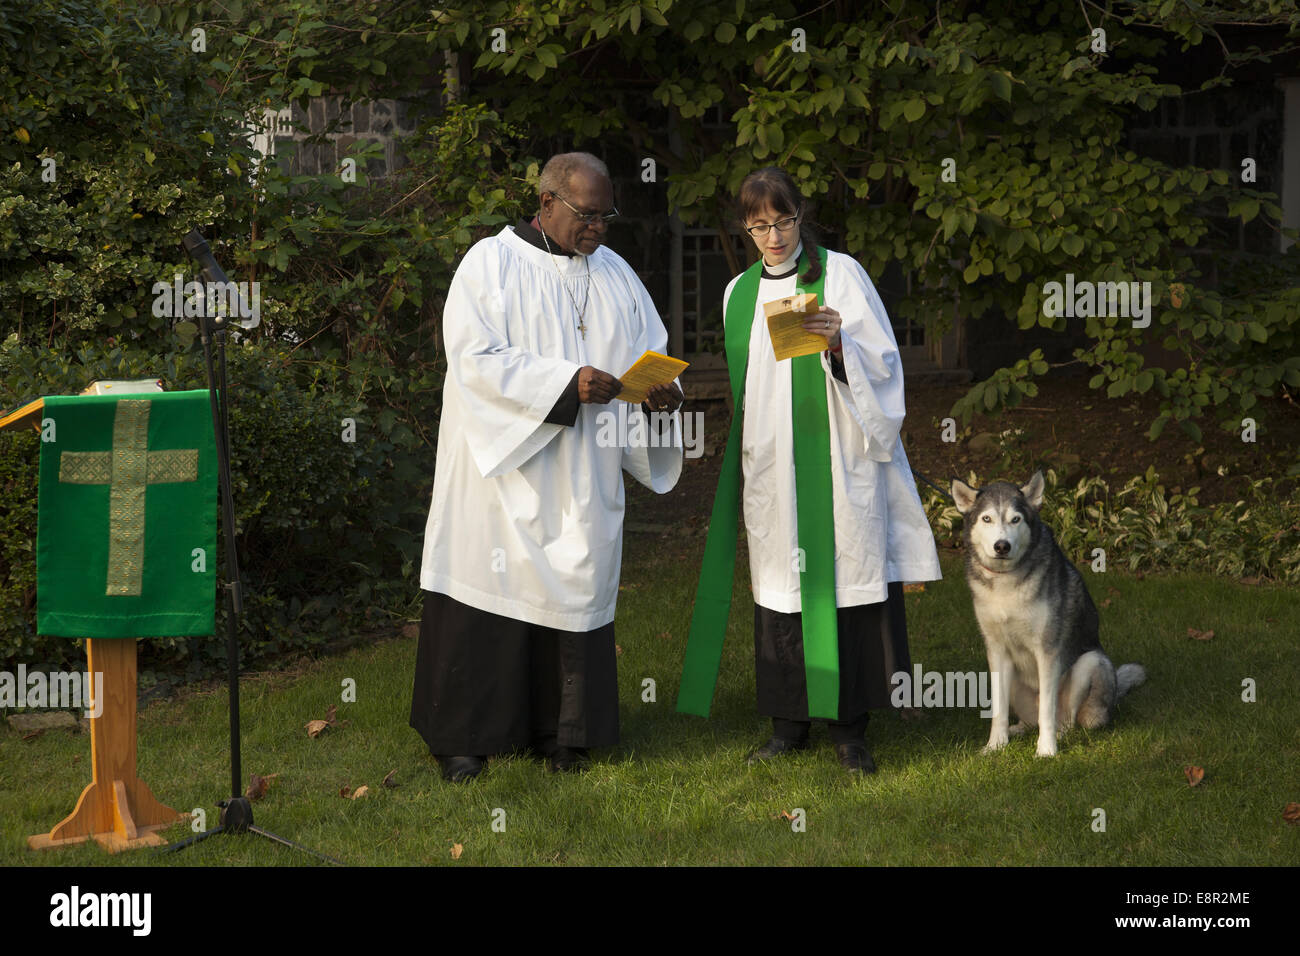 Priests prepare to lead a service in the church garden and bless the animals on Saint Francis of Assisi Day in Brooklyn, NY. Stock Photo